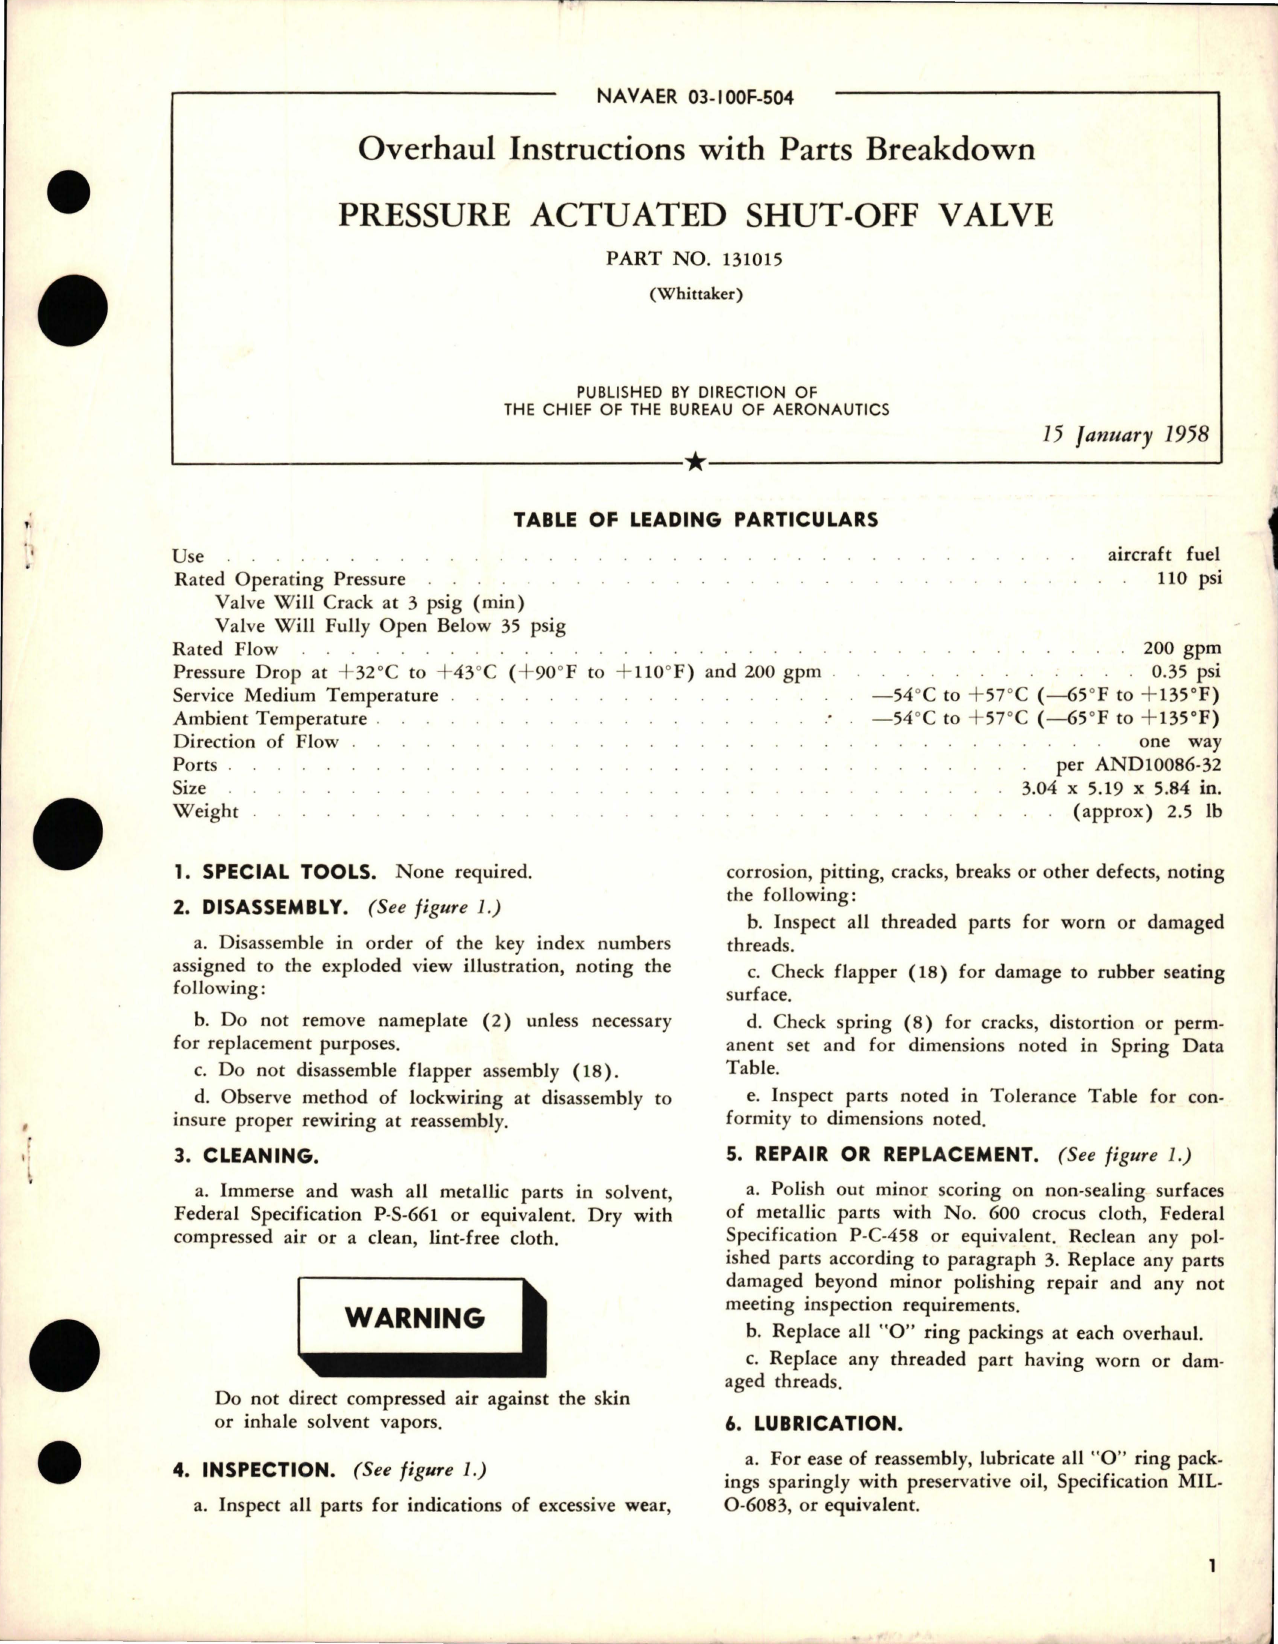 Sample page 1 from AirCorps Library document: Overhaul Instructions with Parts Breakdown for Pressure Actuated Shut-Off Valve - Part 131015